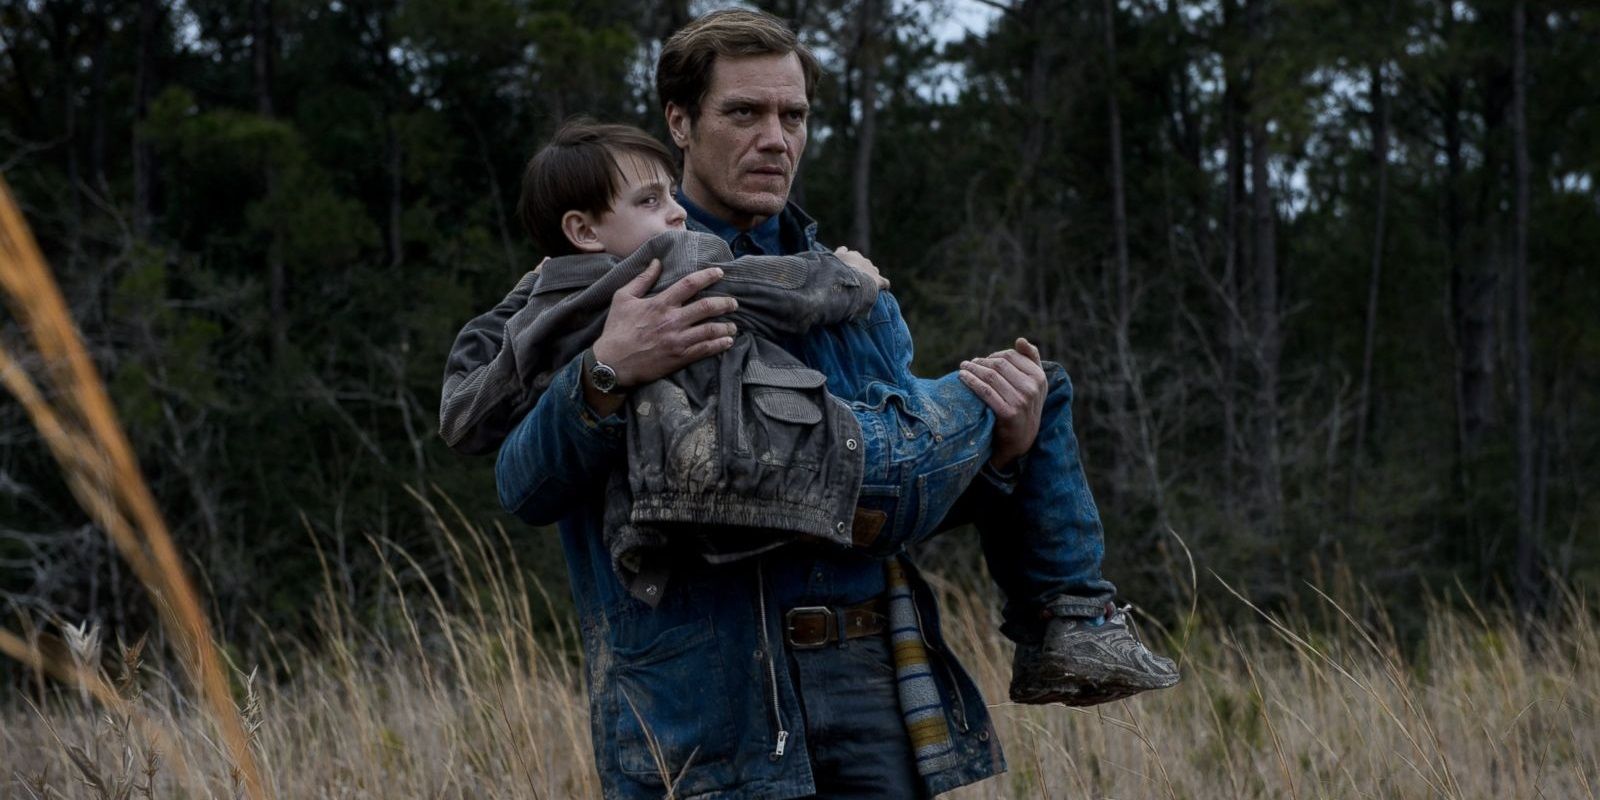 Roy carries his gifted son Alton in Midnight Special.